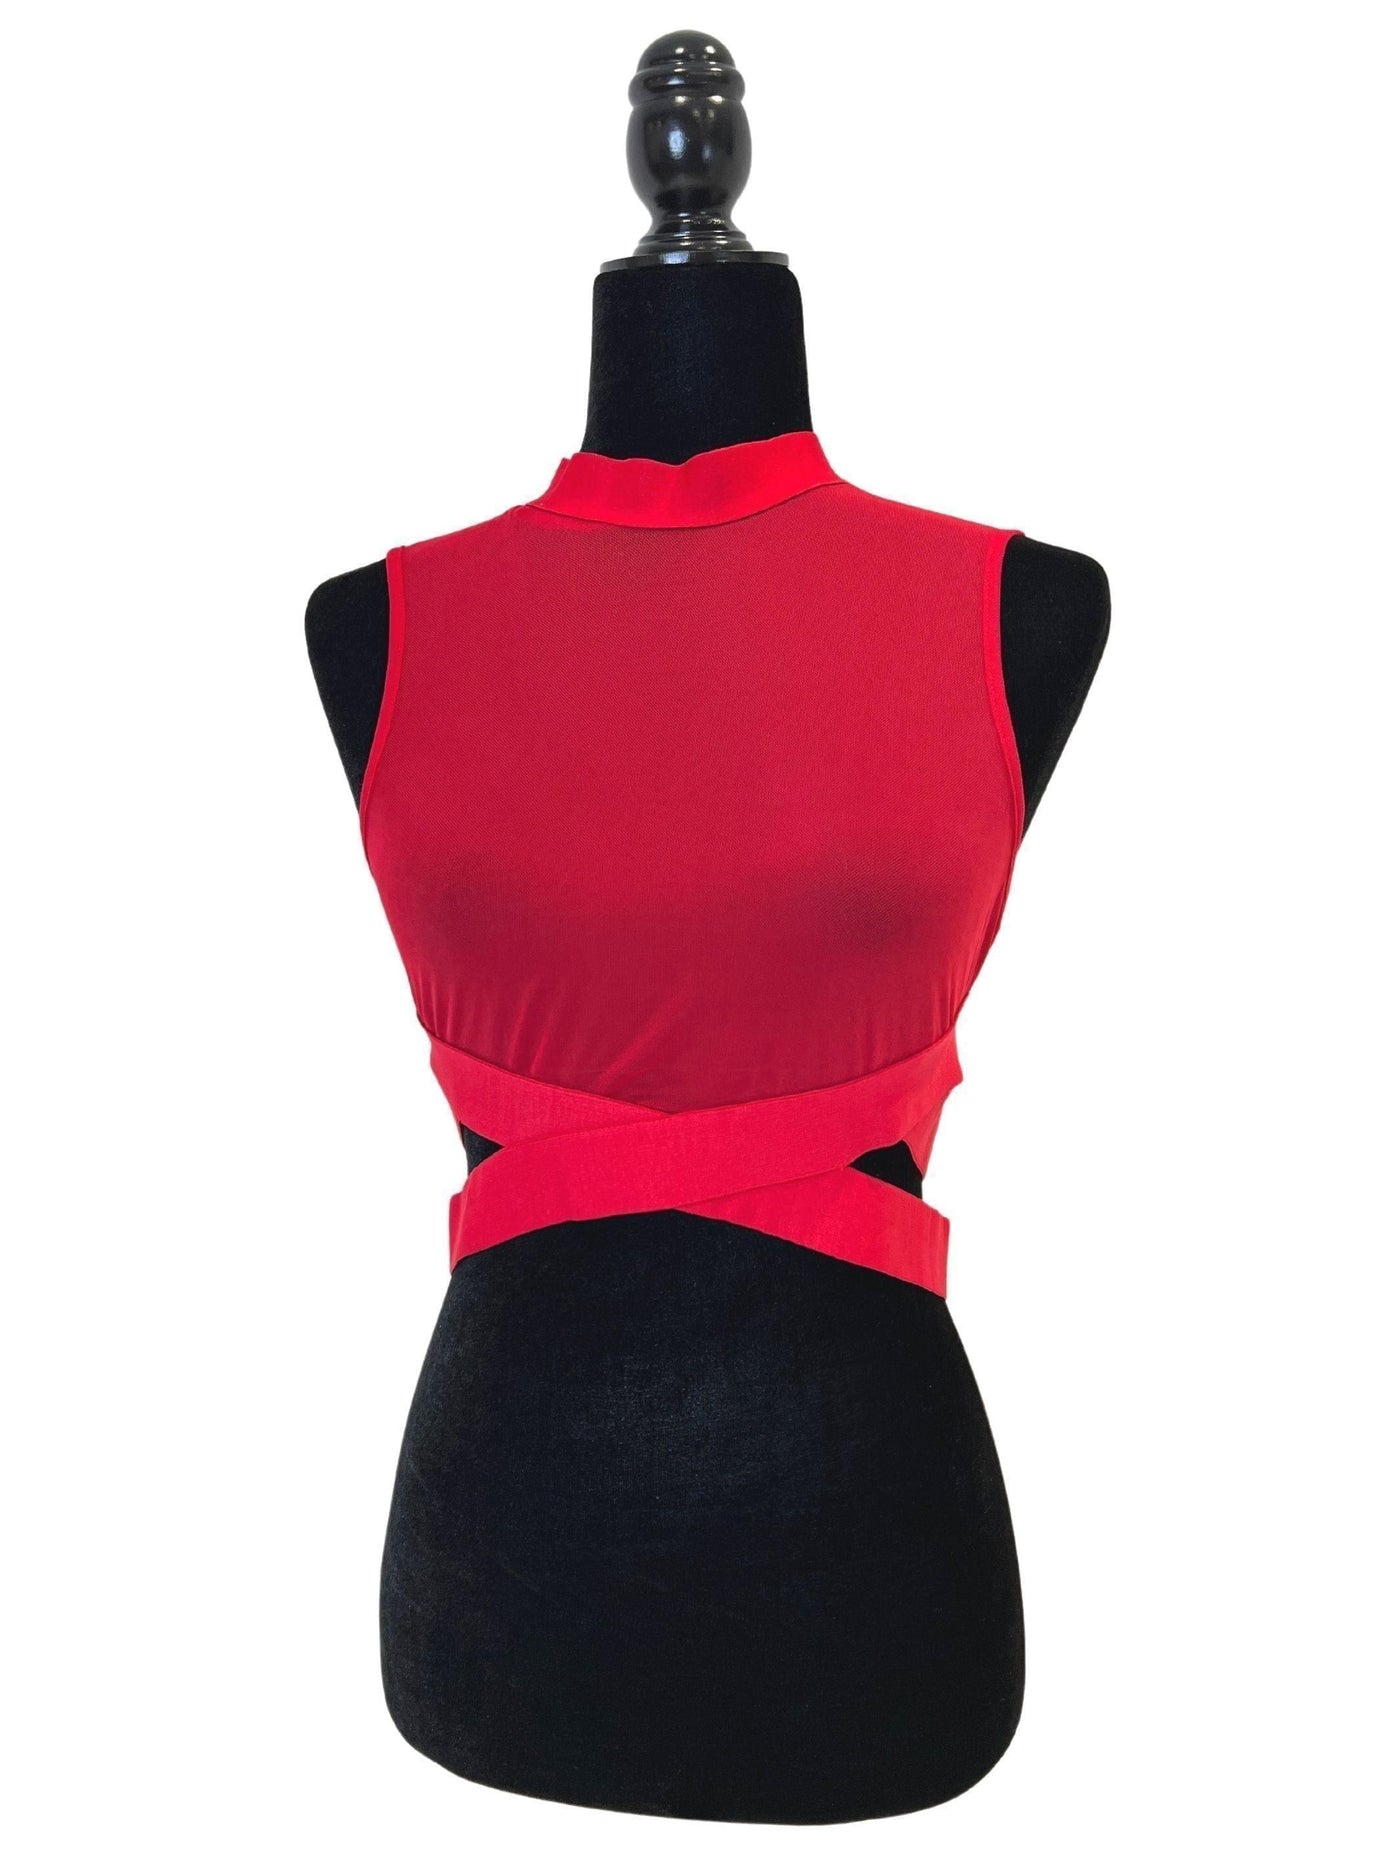 On The Edge | Mesh Crop Top - Statement Piece NY _tab_plus-size-size-chart, _tab_size-chart, Bandage Top, Black, Mesh, Mesh crop top, Red, Sleeveless, statement, Statement Clothing, statement piece, Statement Piece Boutique, statement piece ny, Statement Pieces, Statement Pieces Boutique, Top, Tops Shirts & Tops